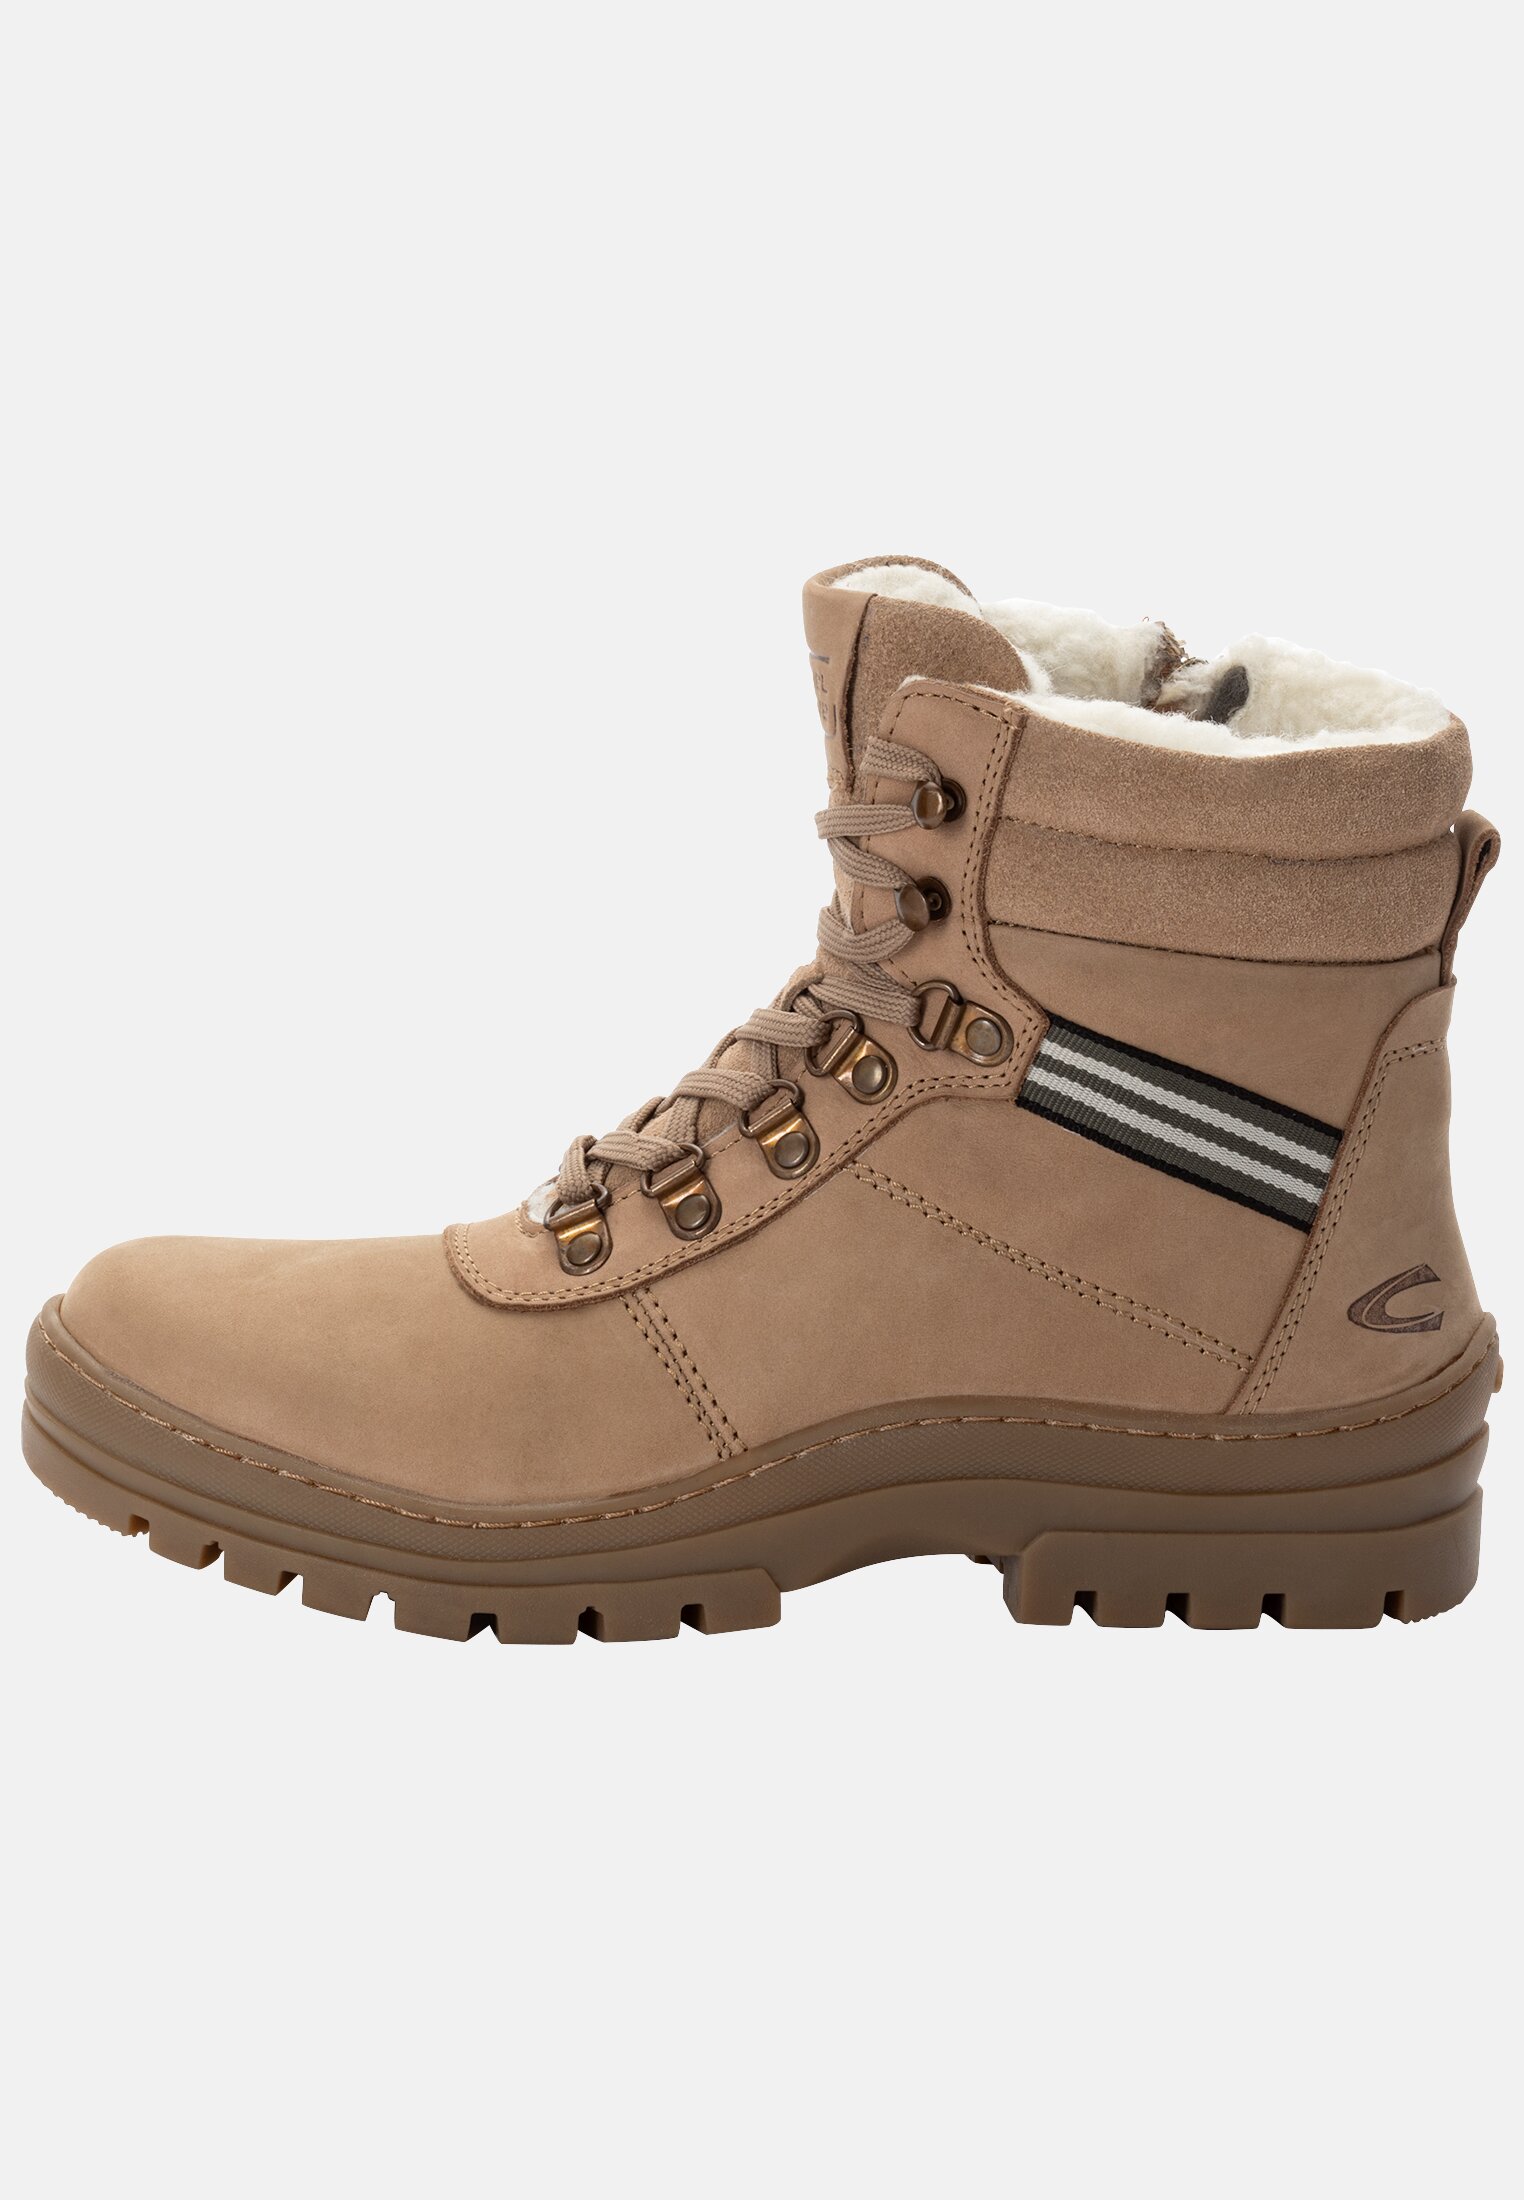 Camel Active Lace-up boot from genuine nubuck leather